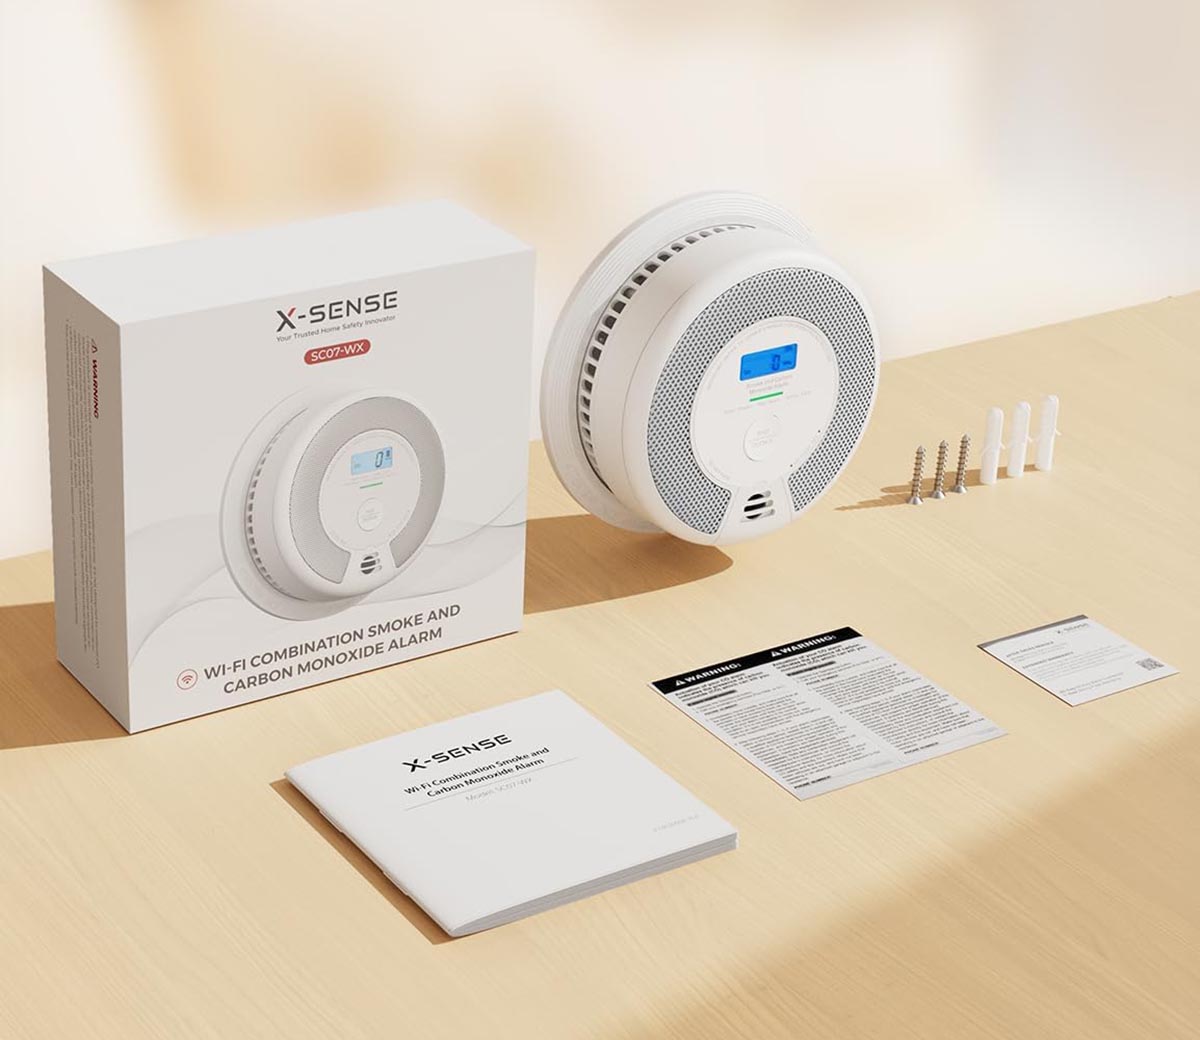 A close up of an X-sense smoke alarm and its components and box laid out on a table. 